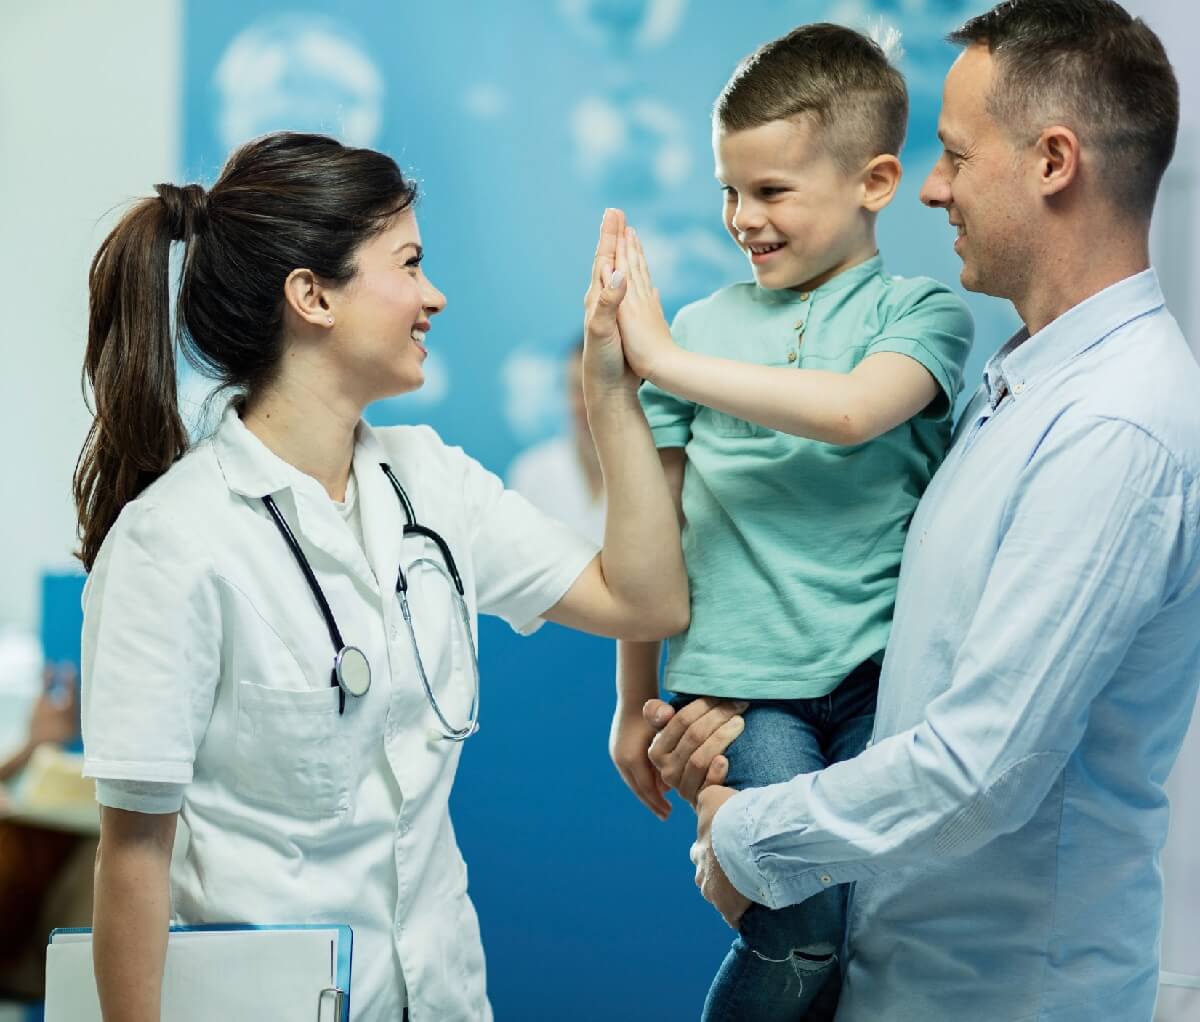 APRN with Post Master's Certificate High Fiving Child Patient